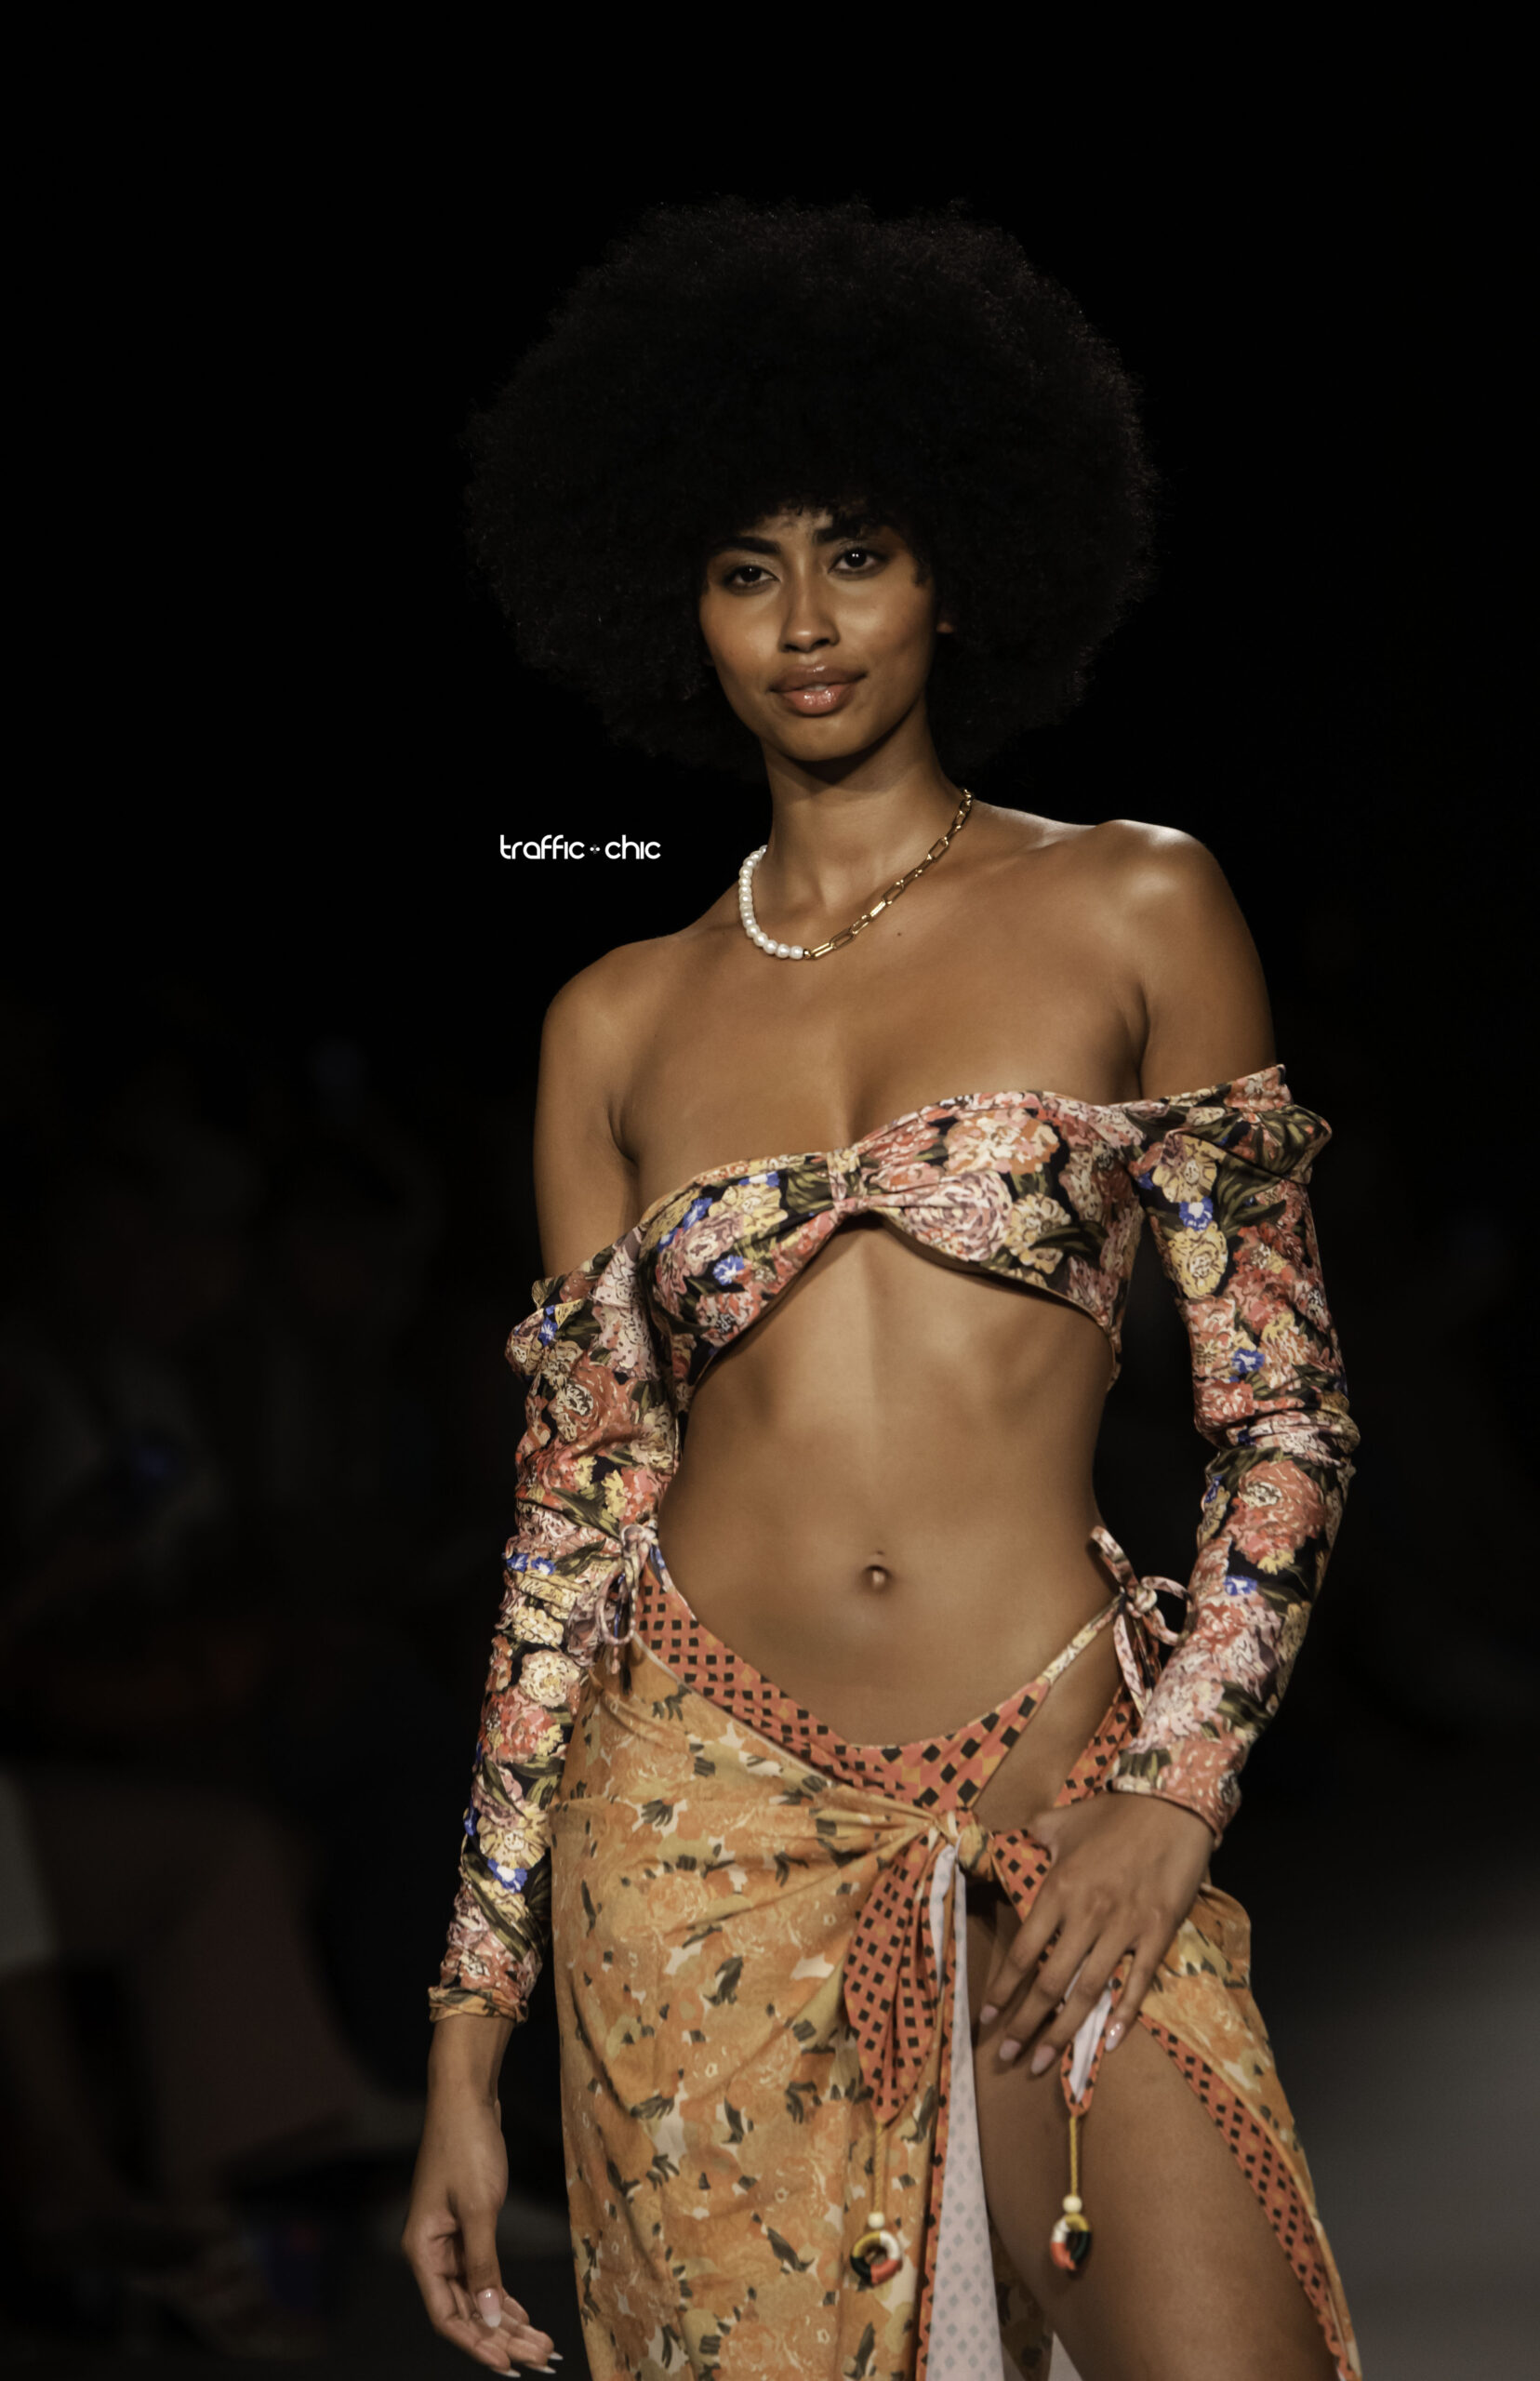 Smeralda at Destination Colombia runway show at Paraiso Miami Beach - Photo by Michael Ferrer for TRAFFIC CHIC